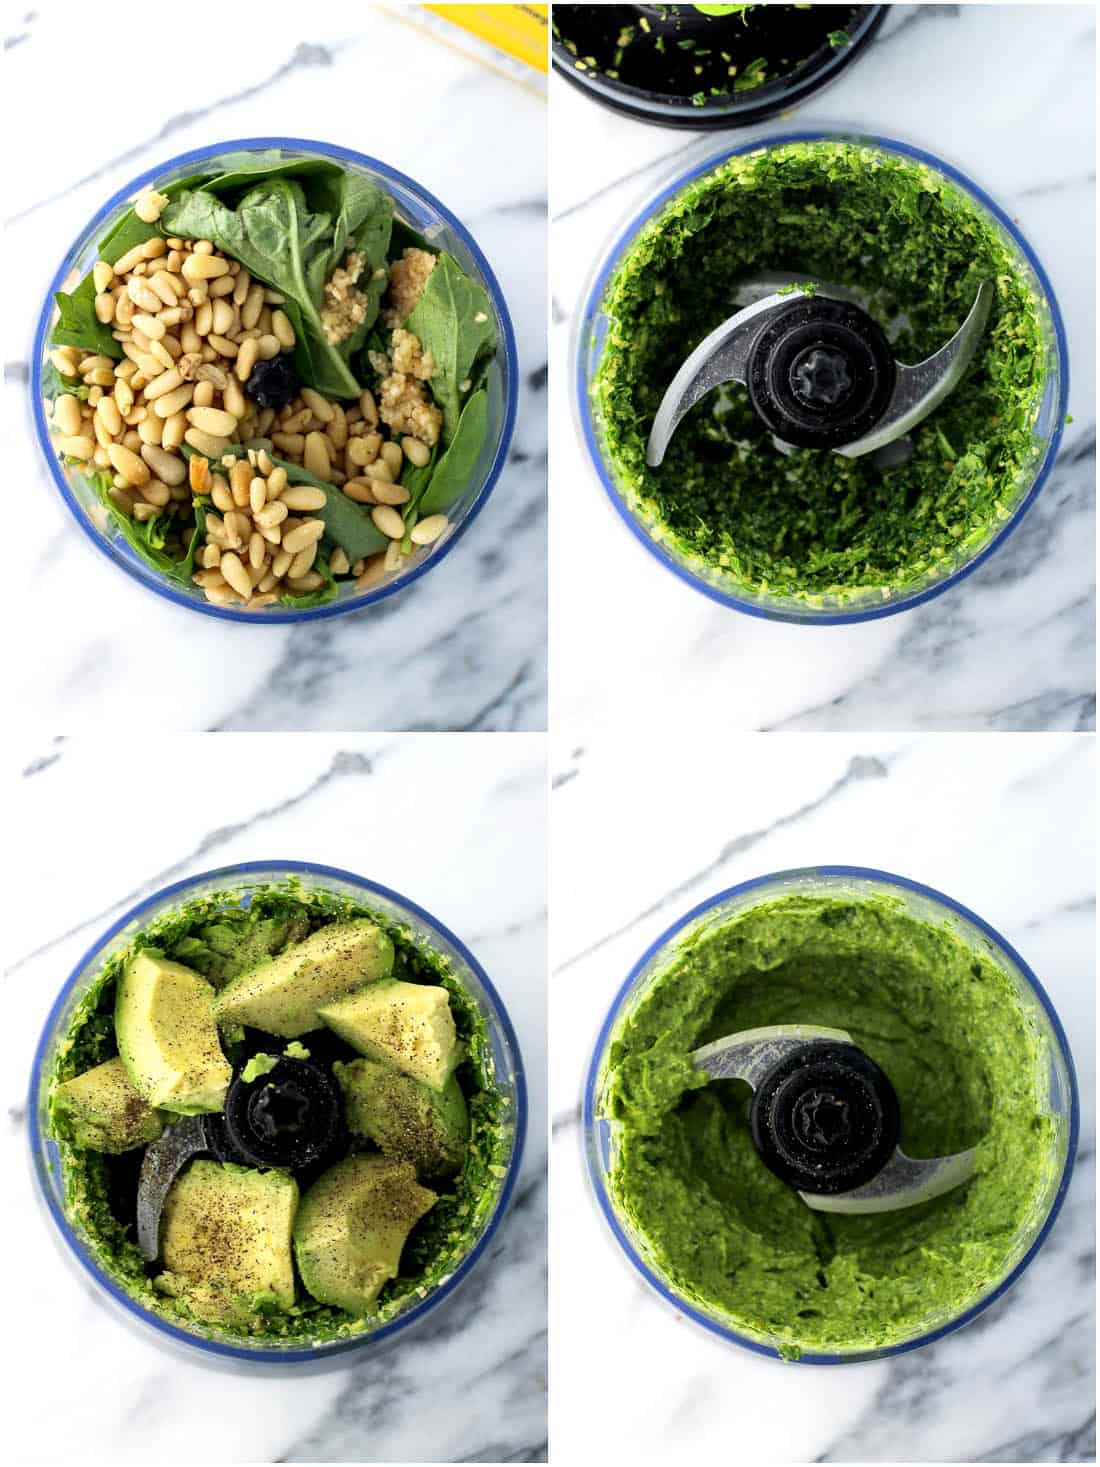 Four stages of making avocado pesto sauce in a food processor.